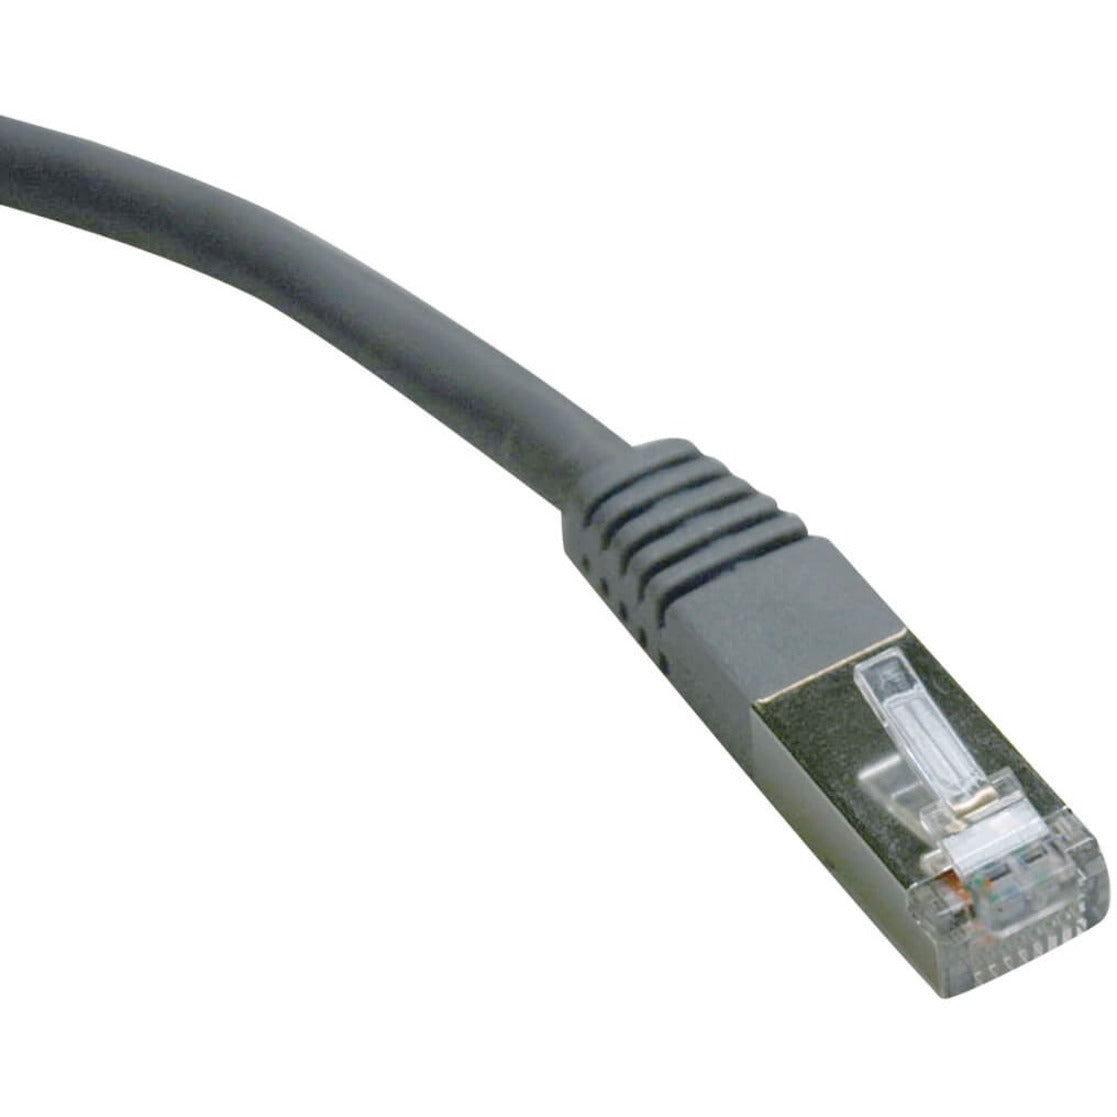 Tripp Lite N125-007-GY Cat6 FTP Patch Cable, 7ft Gray, Strain Relief, EMI/RF Protection